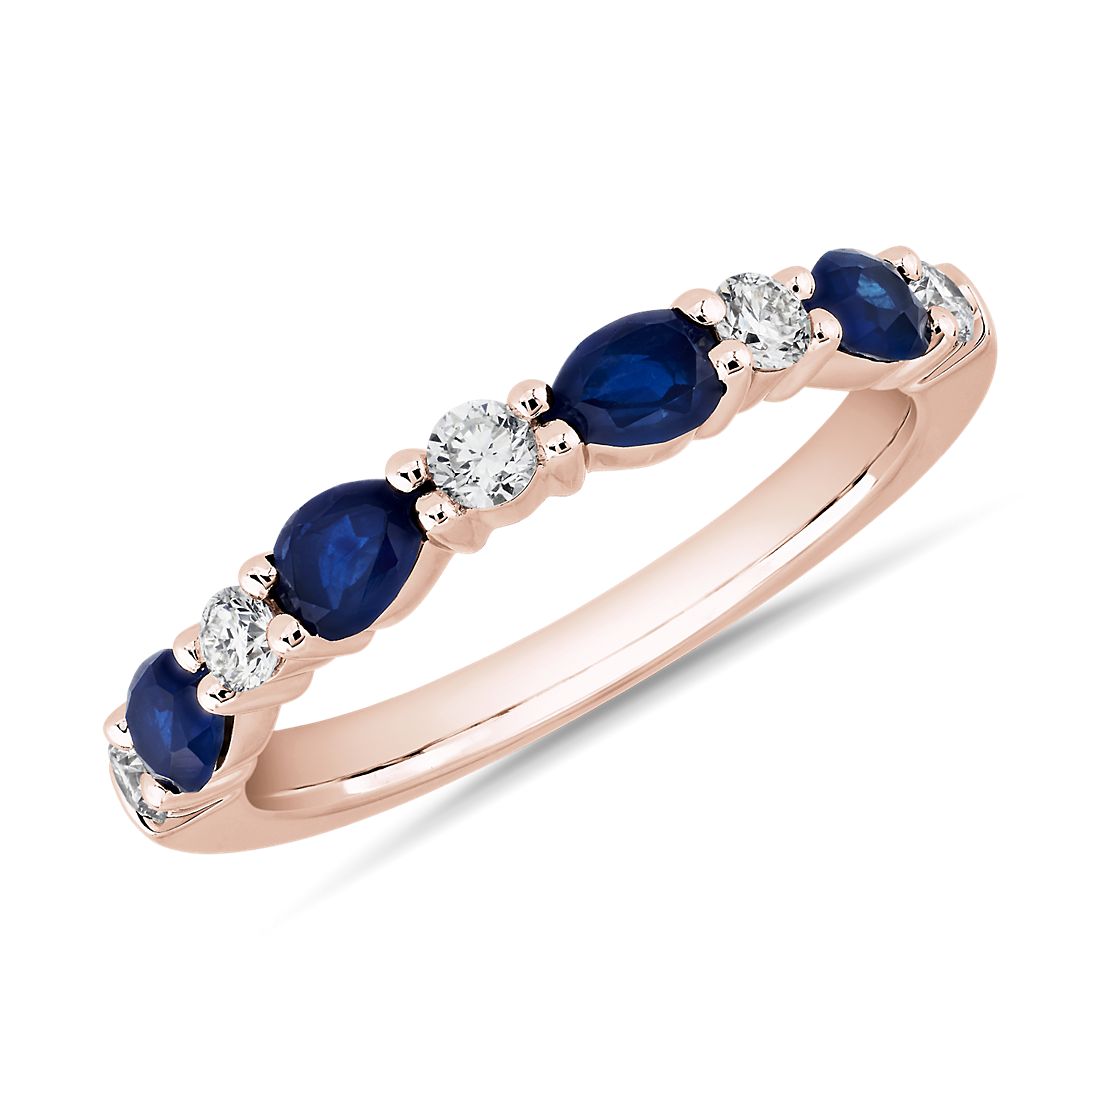 Alternating Pear Sapphire and Diamond Anniversary Ring in 14k Rose Gold (0.19 ct. tw.)